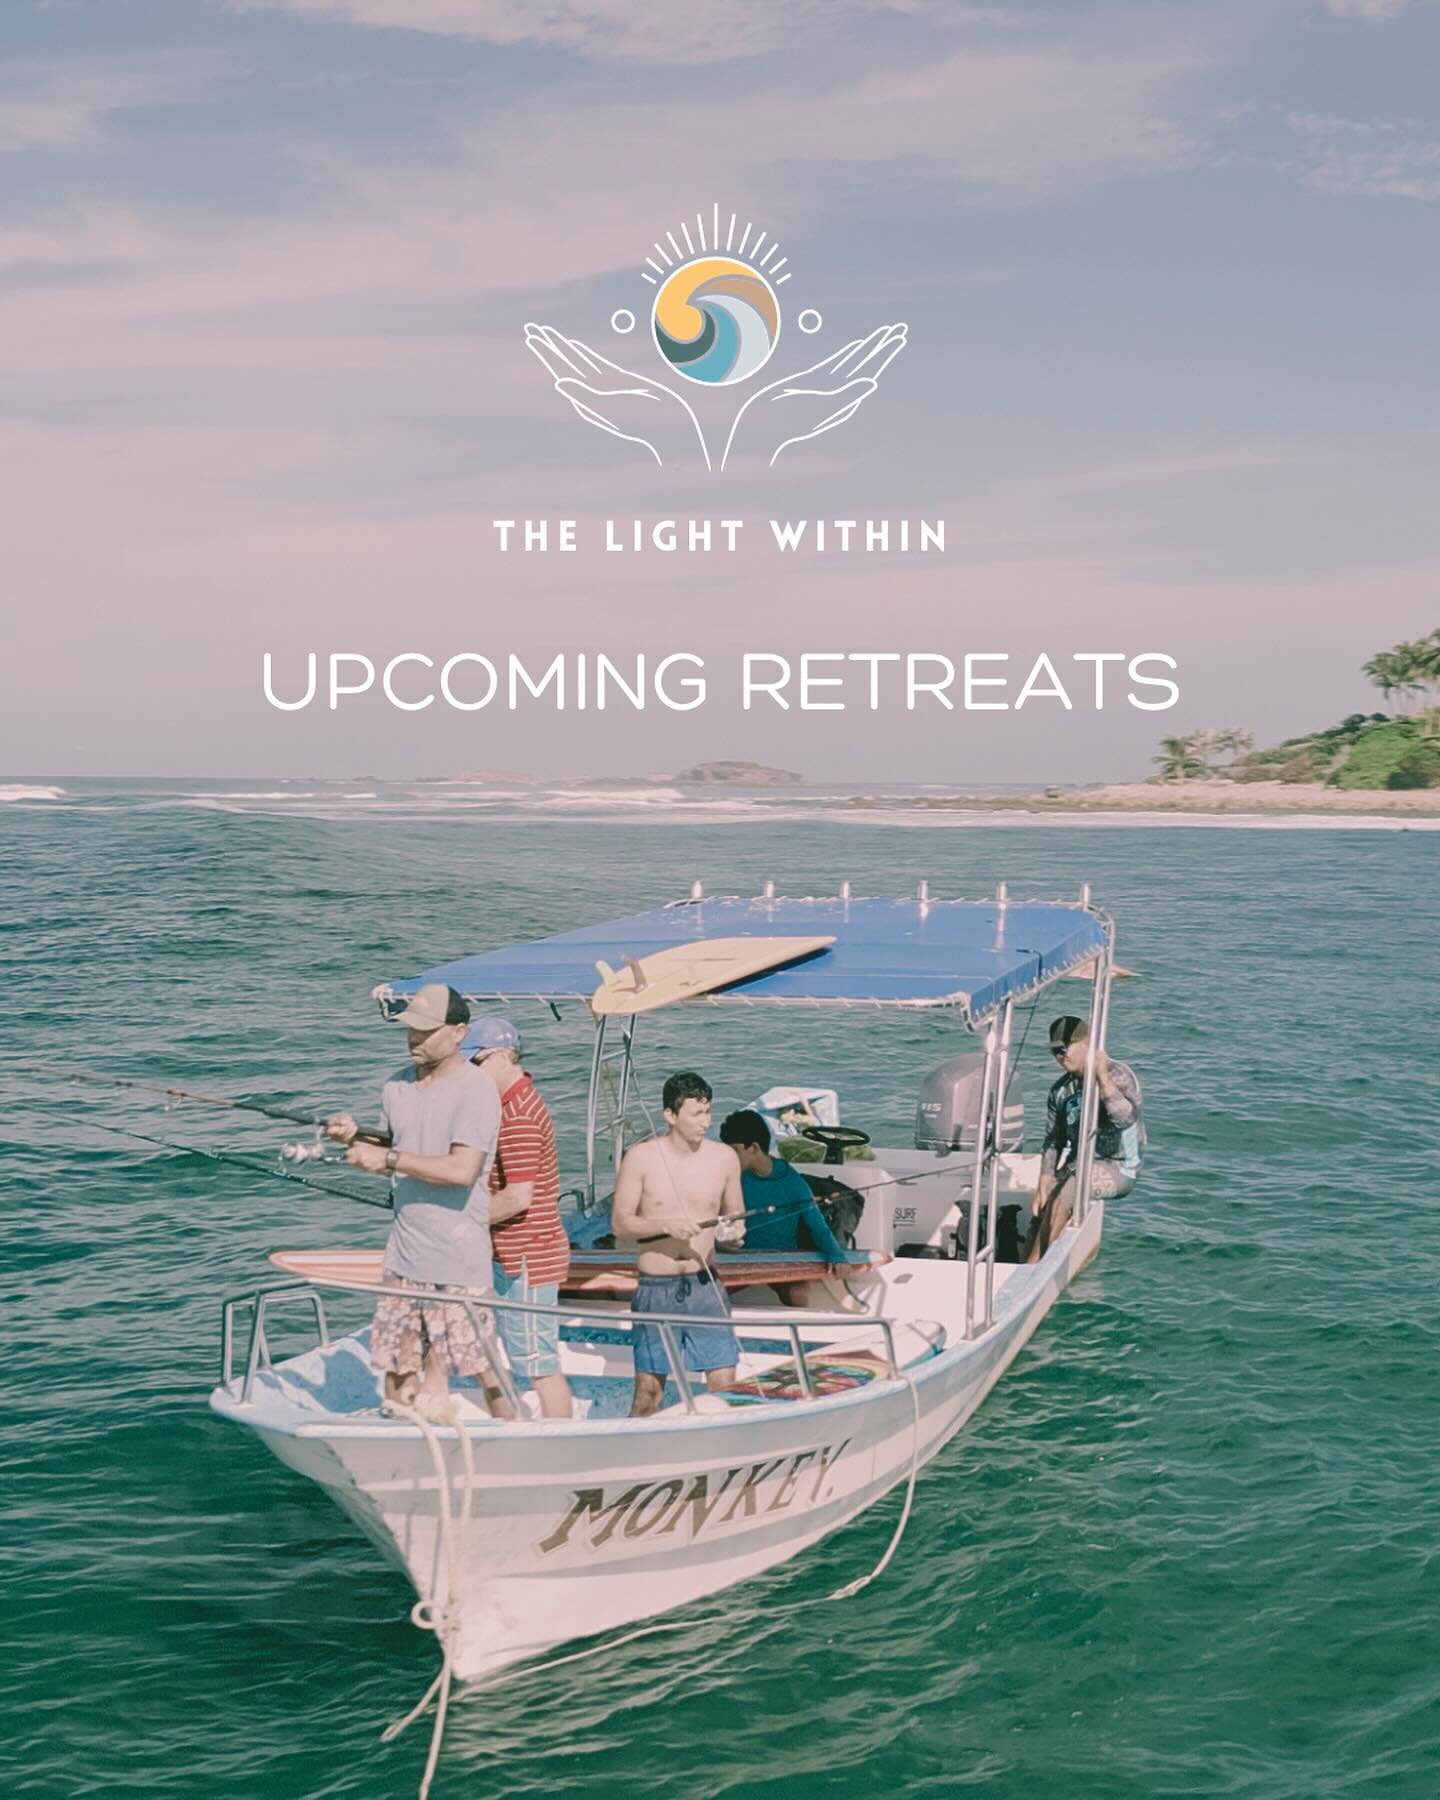 At The Light Within Retreats, our programs have been curated to move energy through the body to release stress, pain, and trauma, while embracing the power of human connection through shared experiences that results in a transformational experience.
